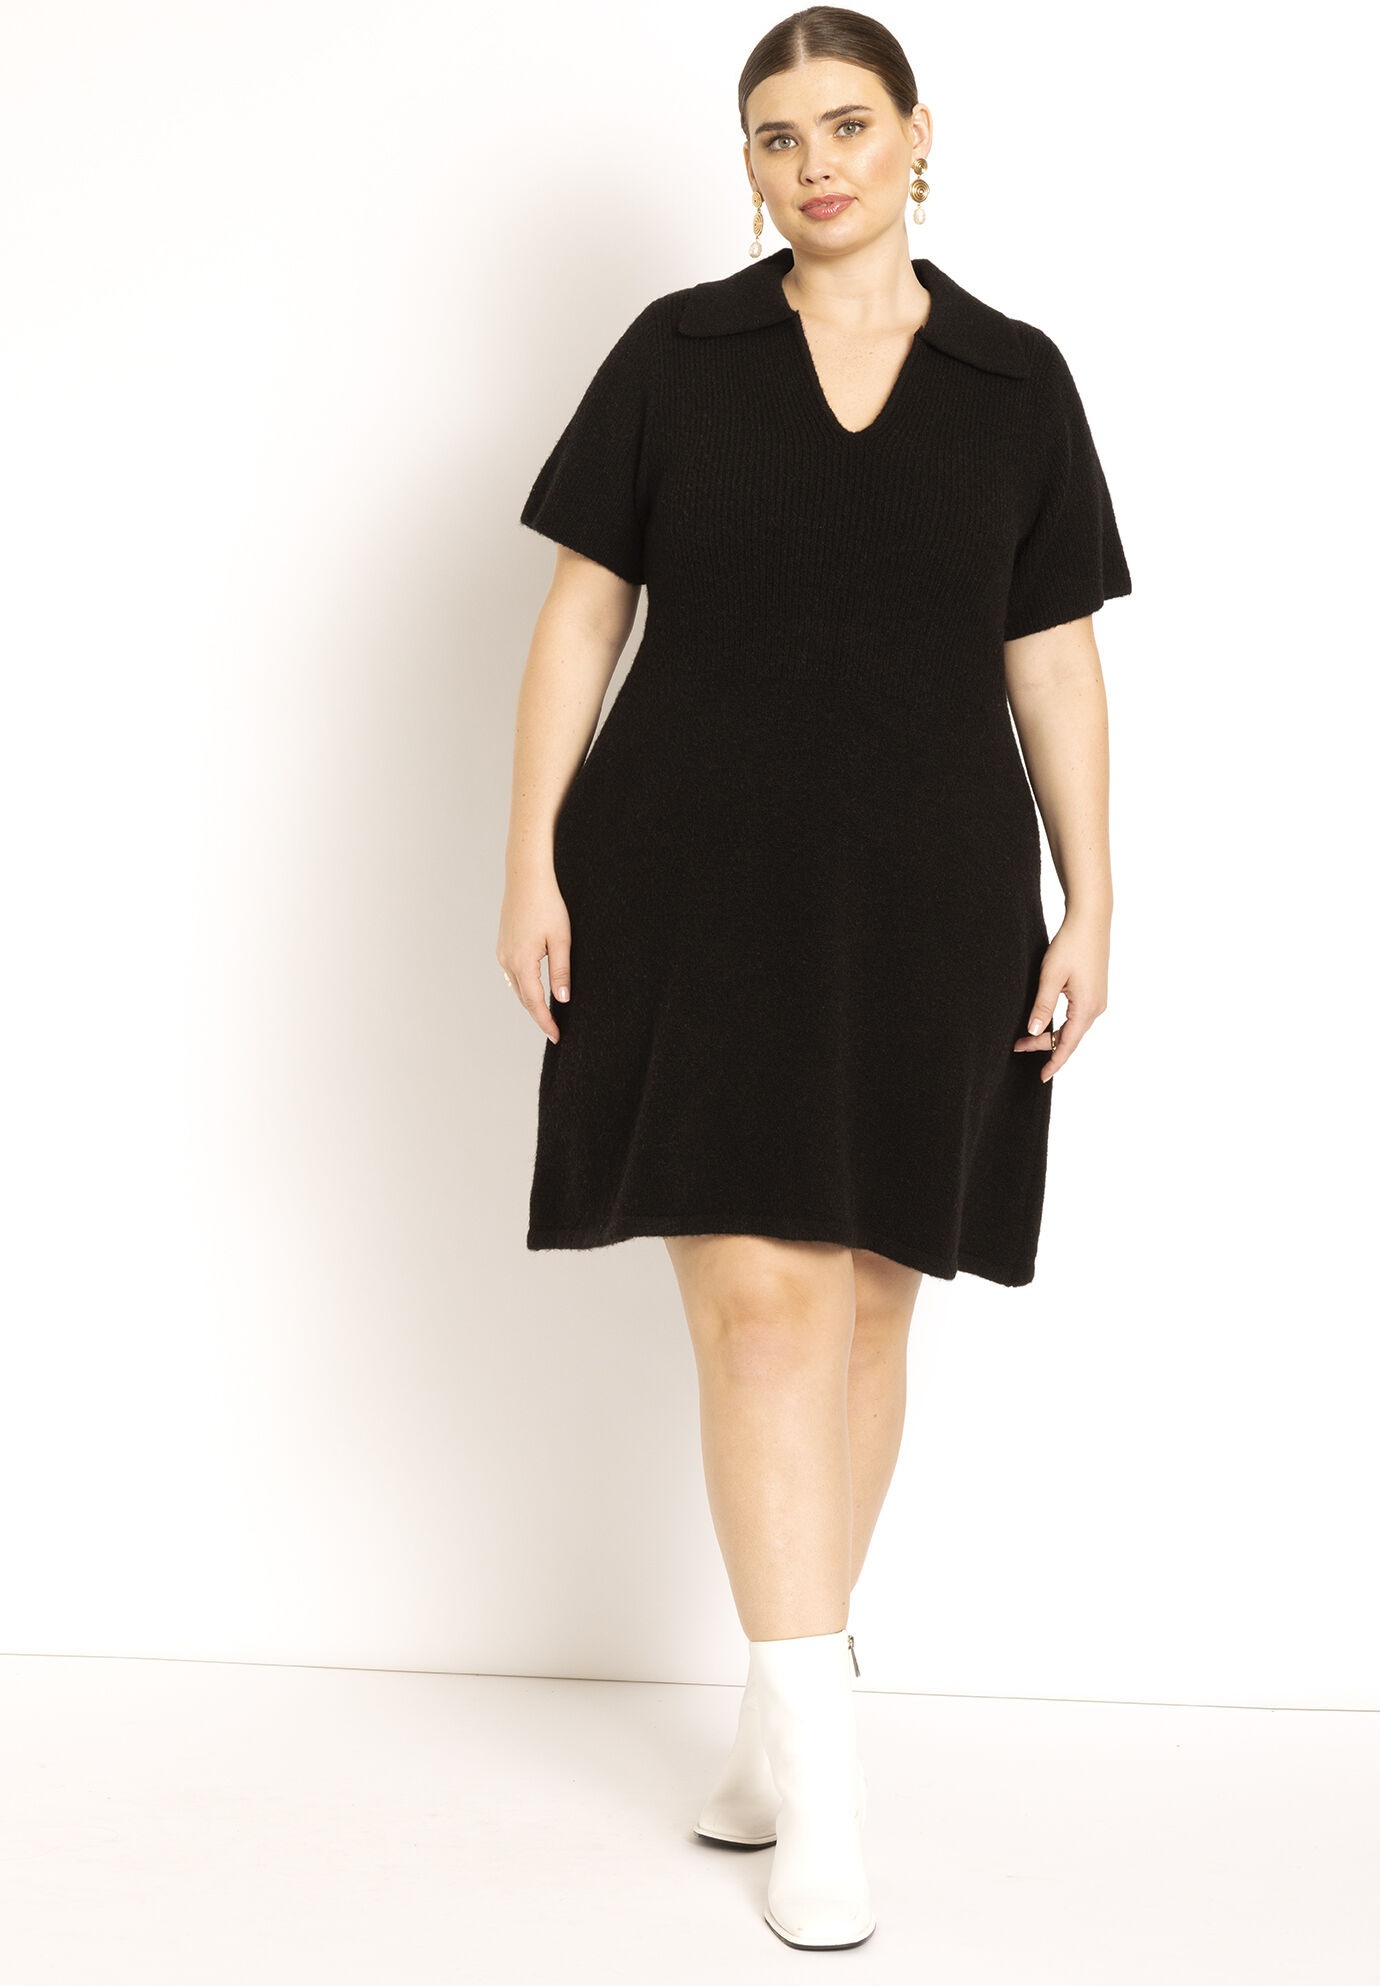 Plus Size Collared Sweater Short Dress